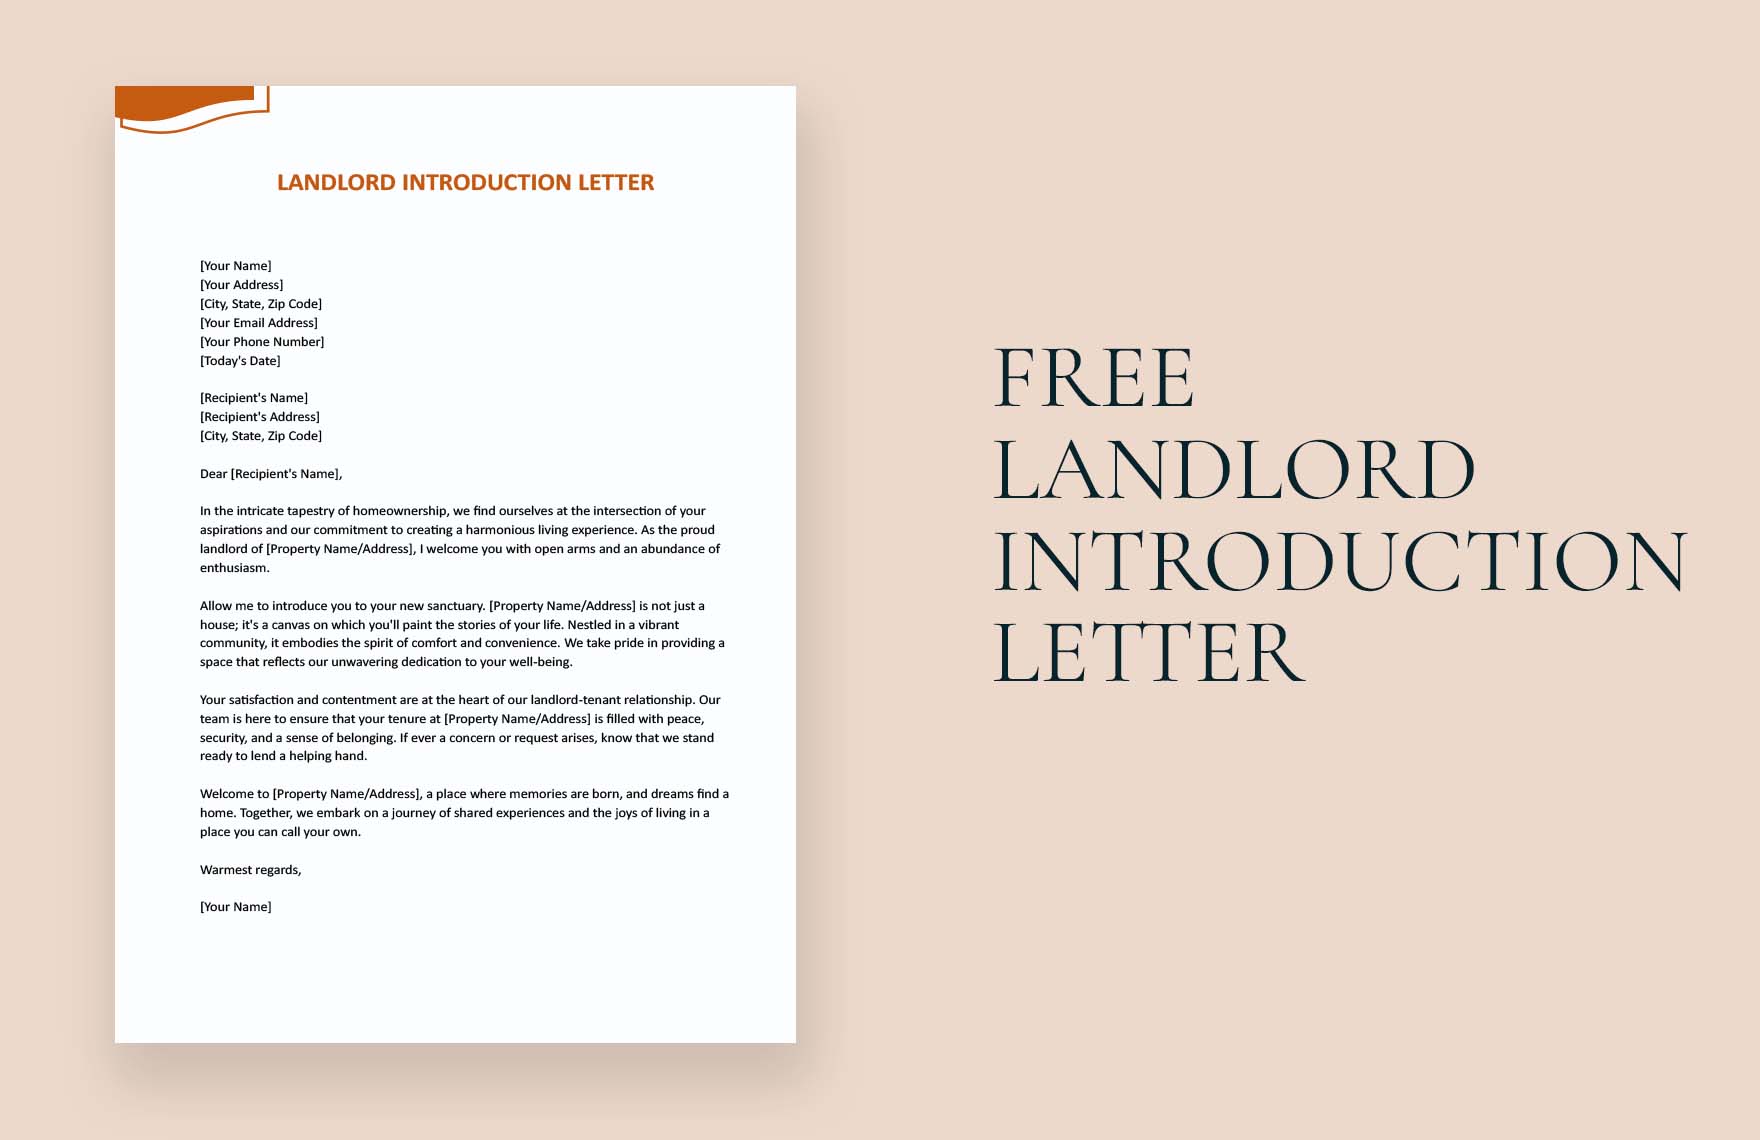 Free Landlord Introduction Letter